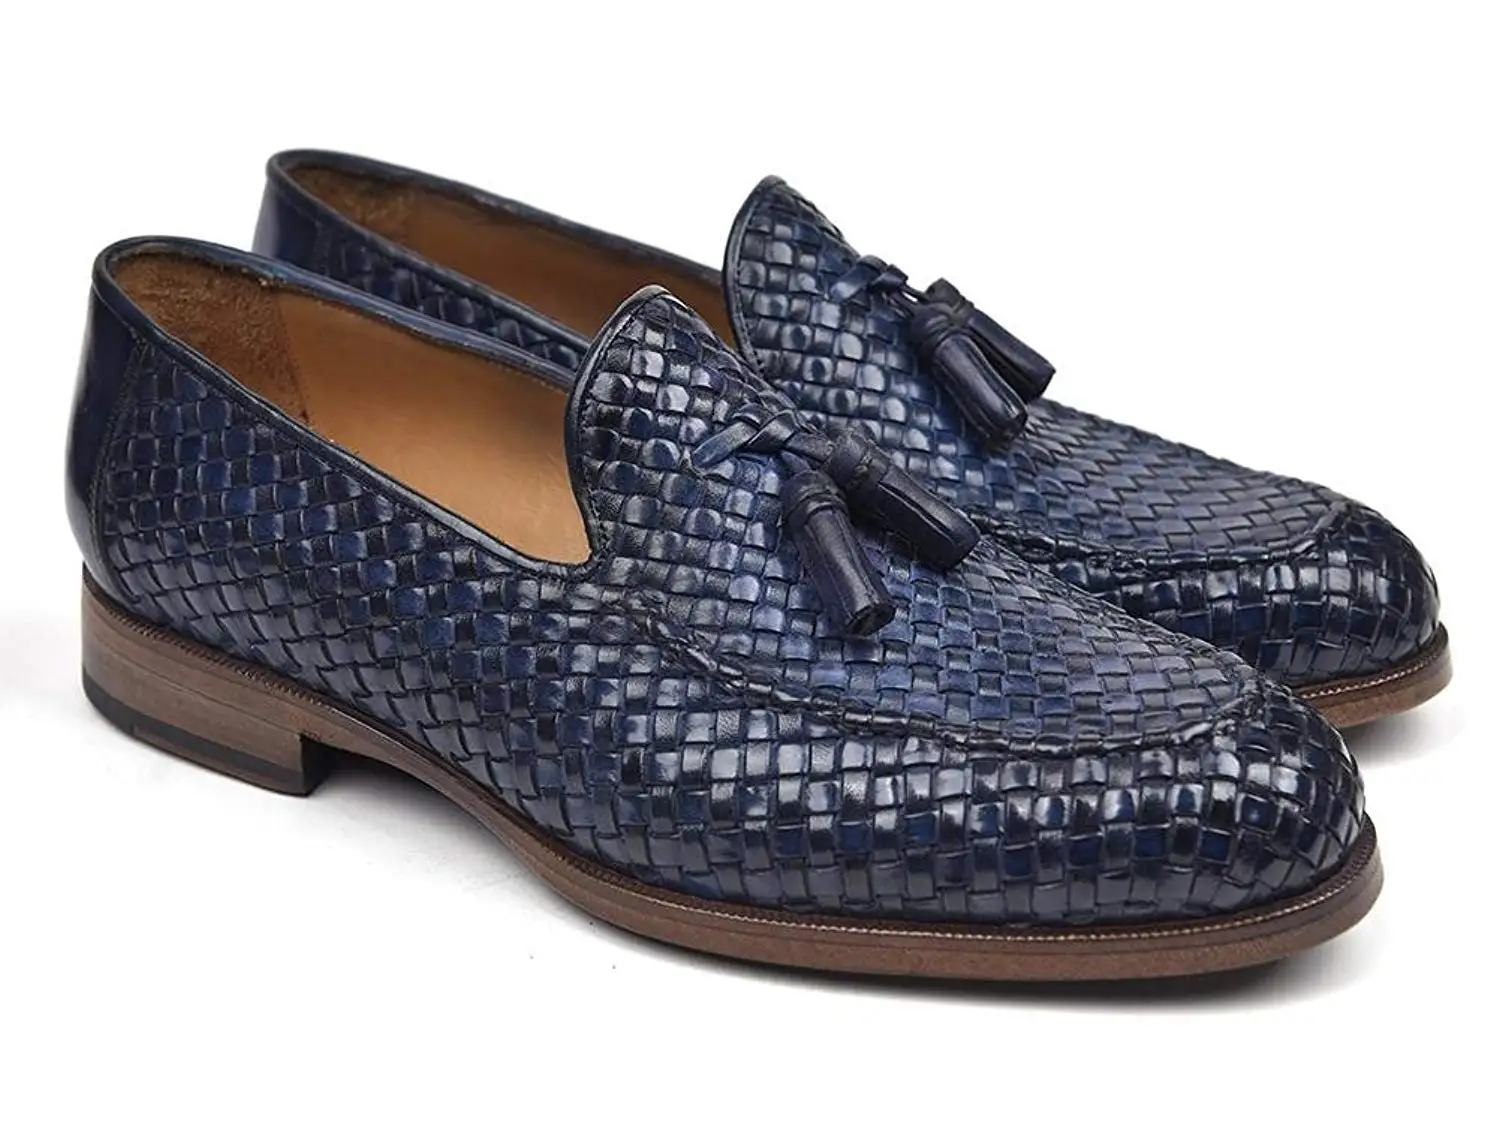 Cheap Navy Loafers For Men, find Navy Loafers For Men deals on line at Alibaba.com